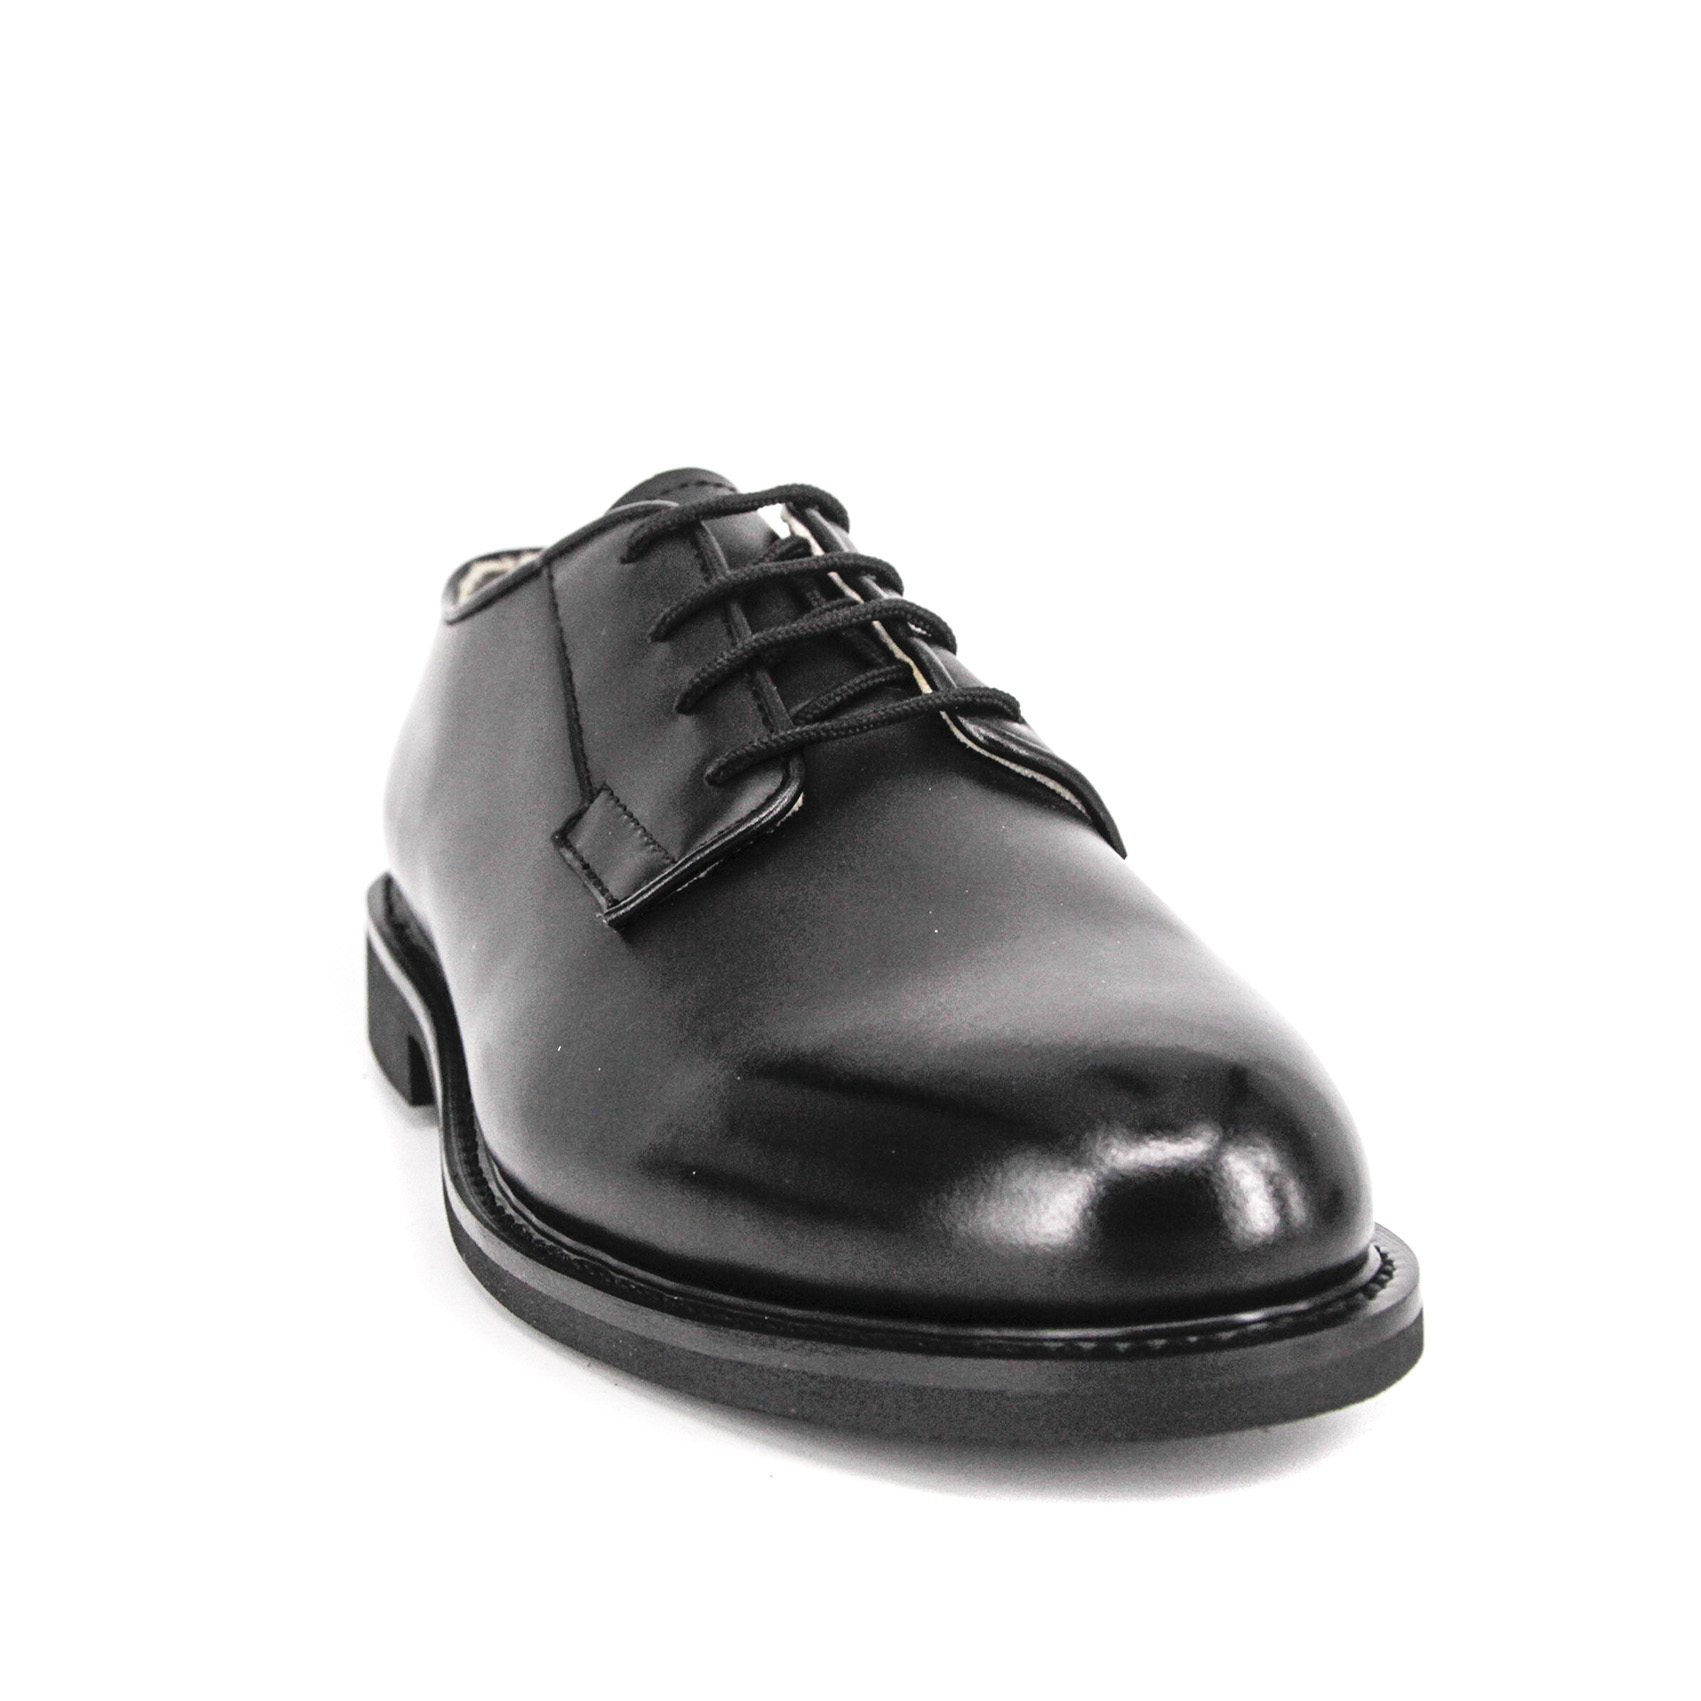 MILFORCE Custom Latest Style Hot Selling Business Office Oxford Shoes Men dress shoe